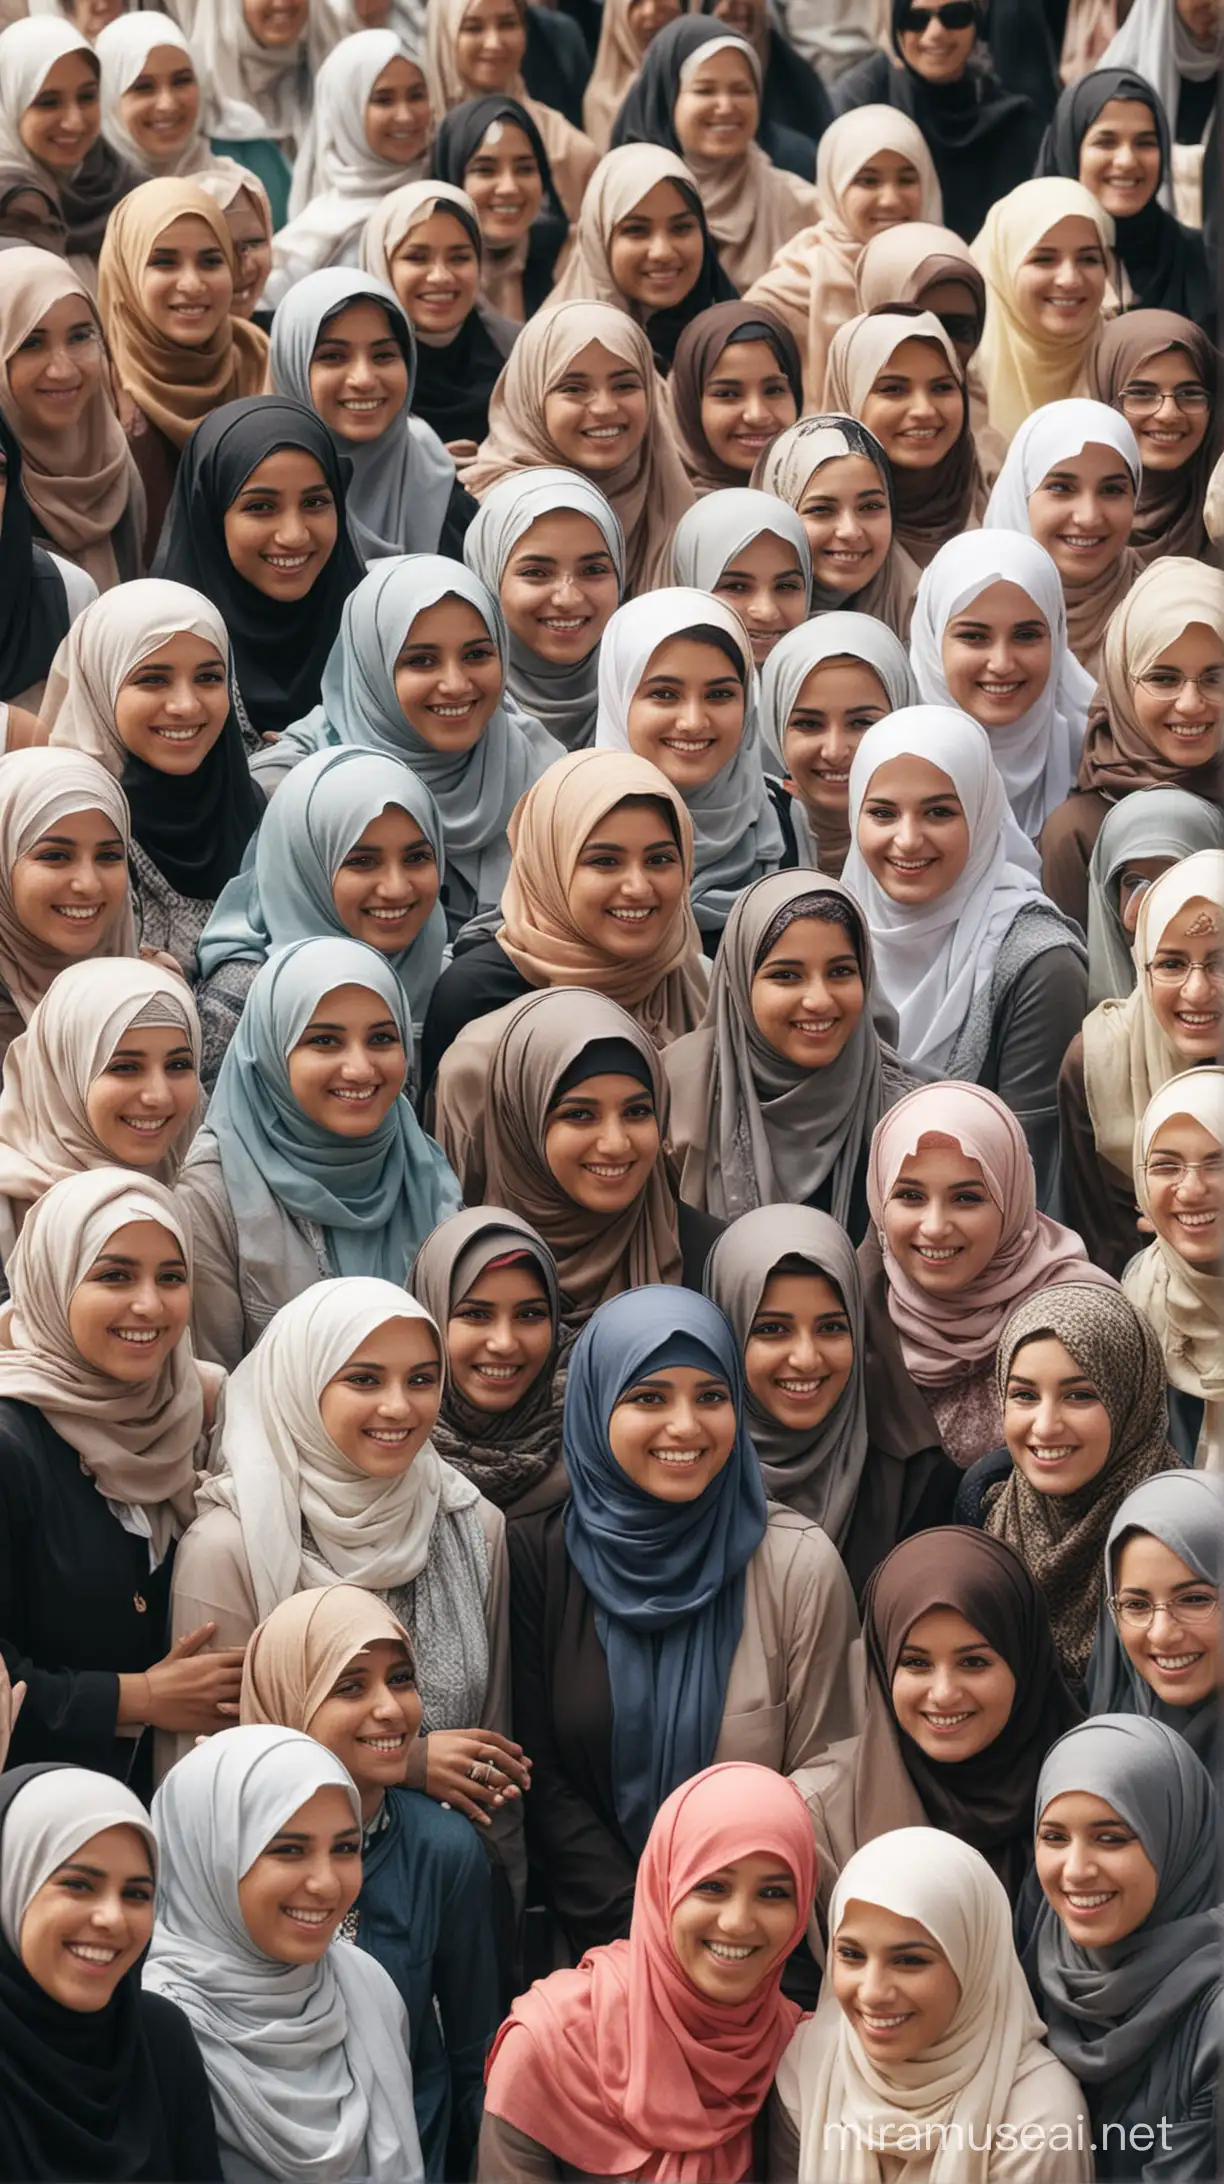 Diverse Muslim Women Engaged in Societal Participation